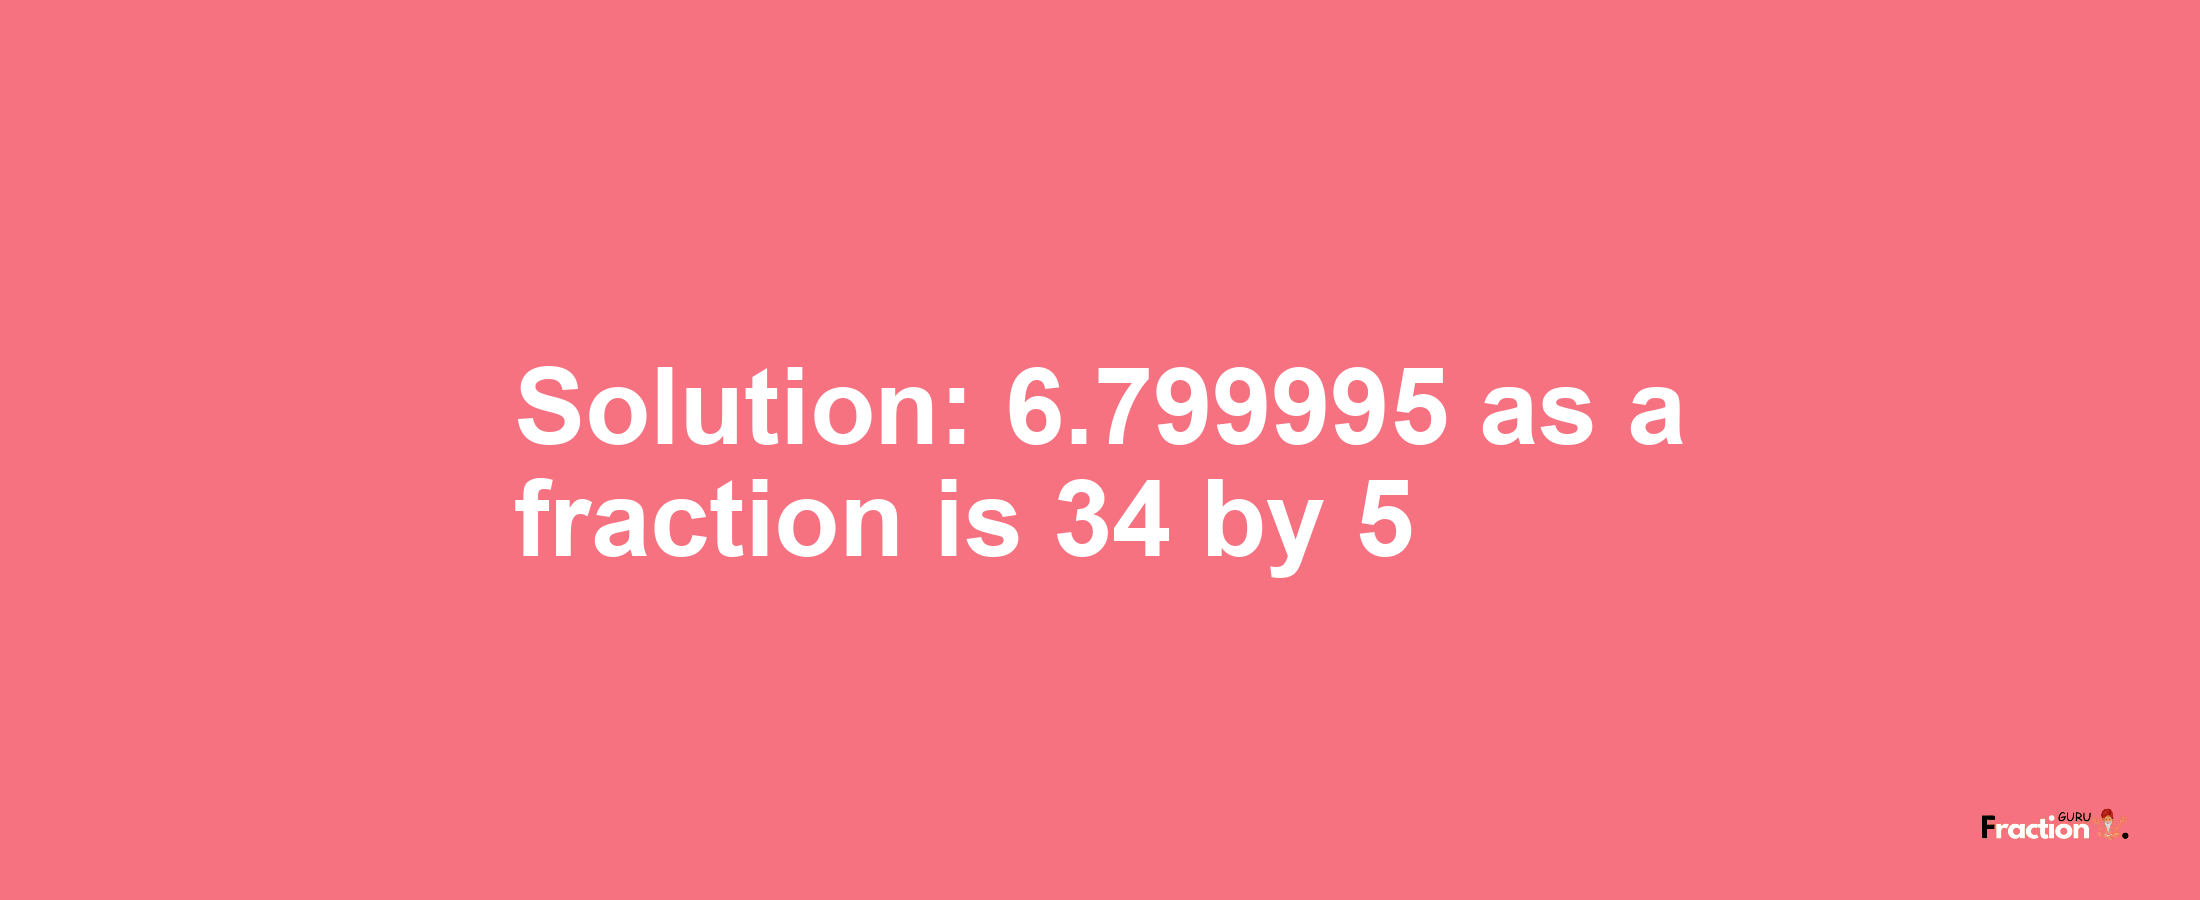 Solution:6.799995 as a fraction is 34/5